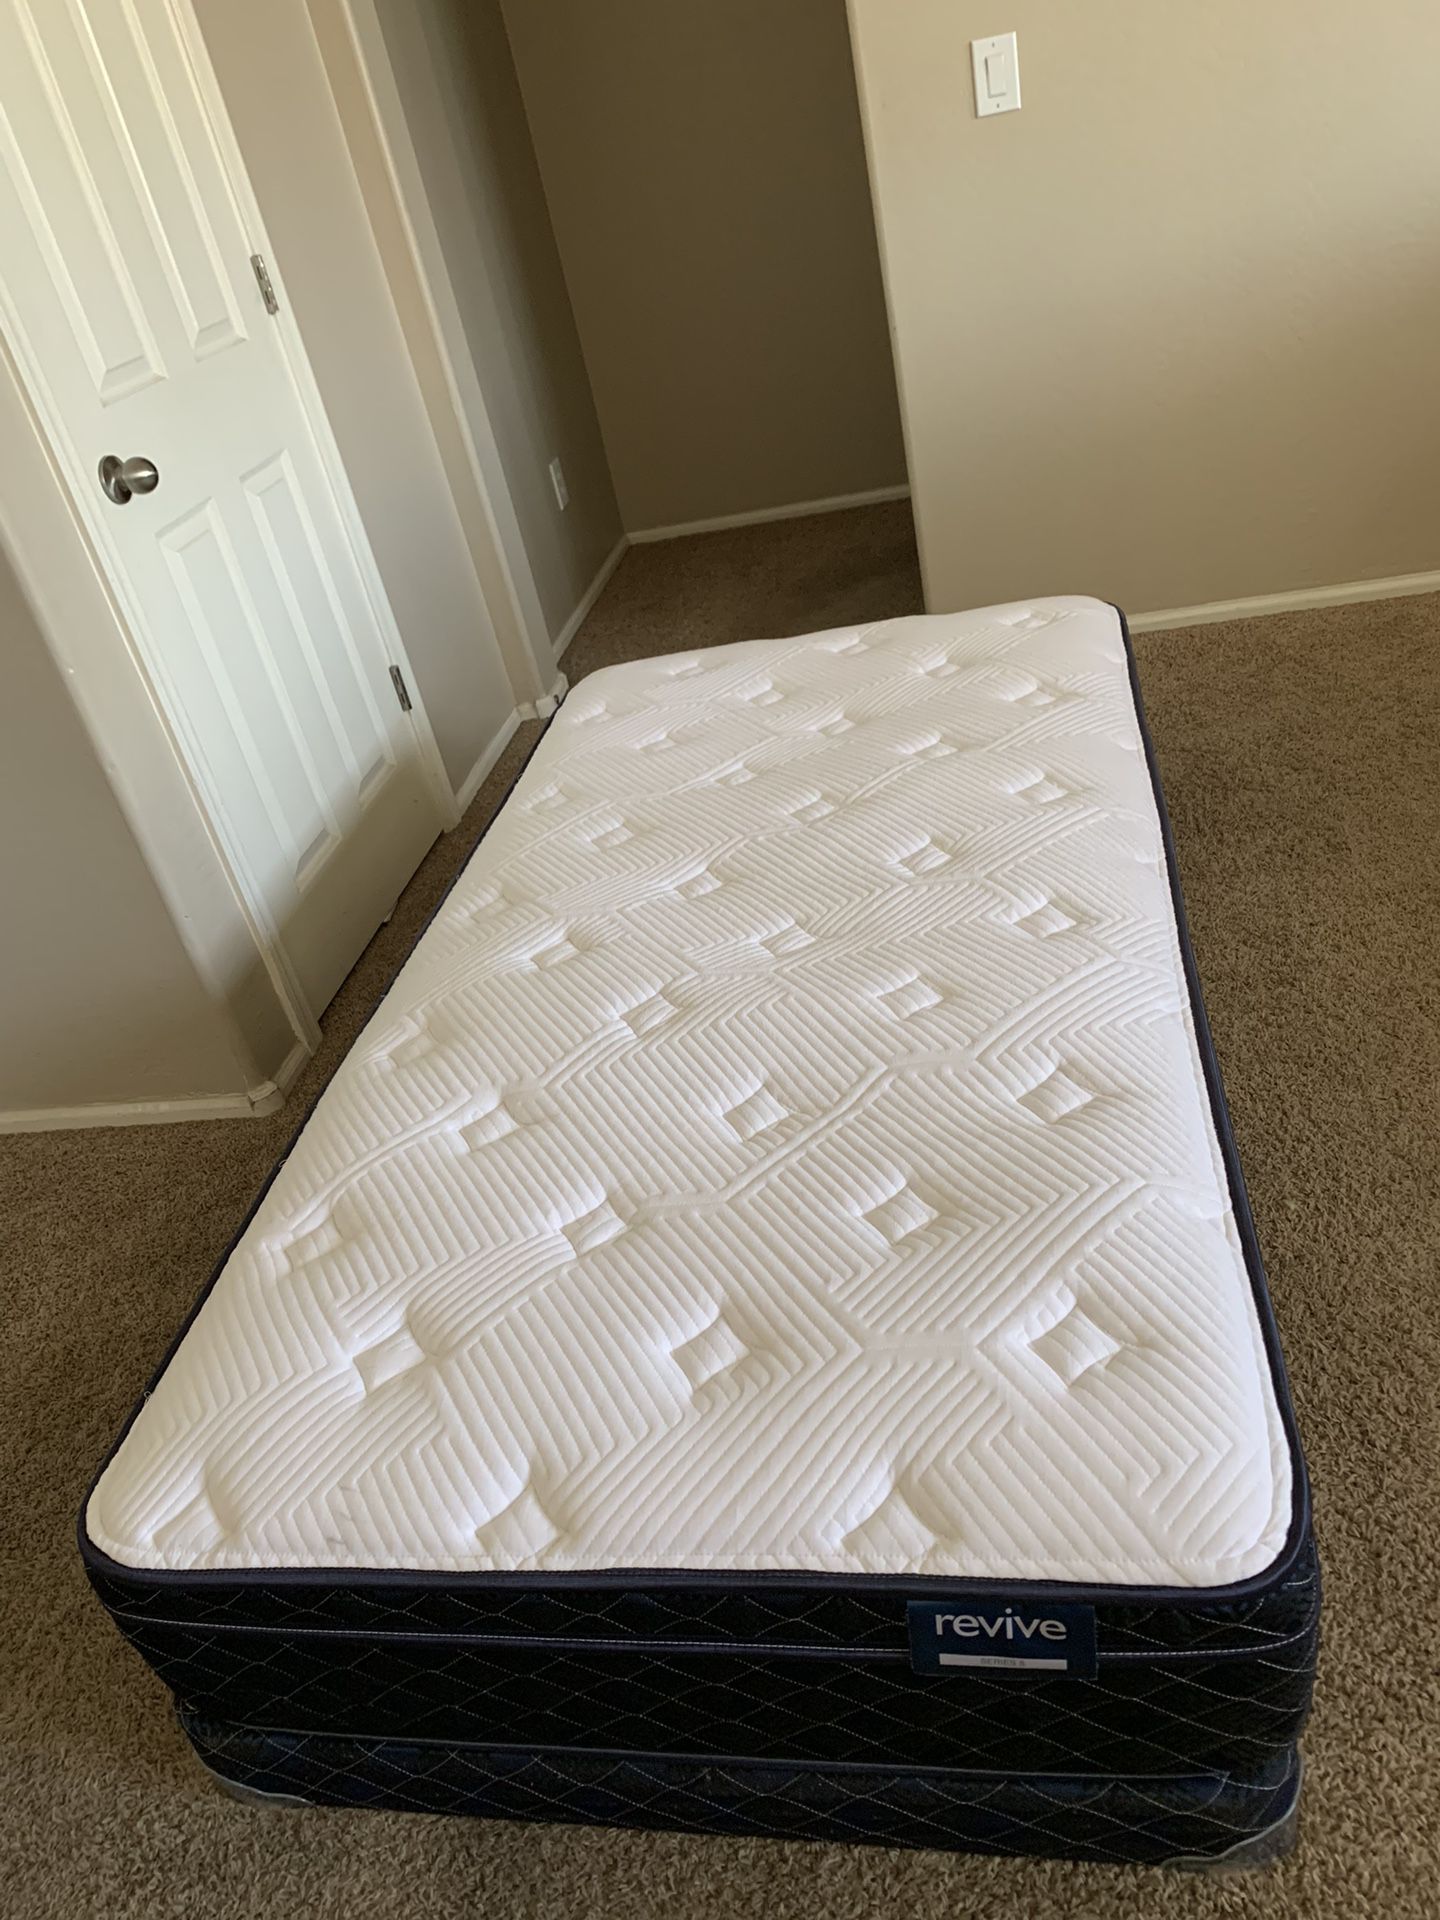 TWIN MATTRESS REVIVE AND FREE LOW PROFILE BOX SPRING 